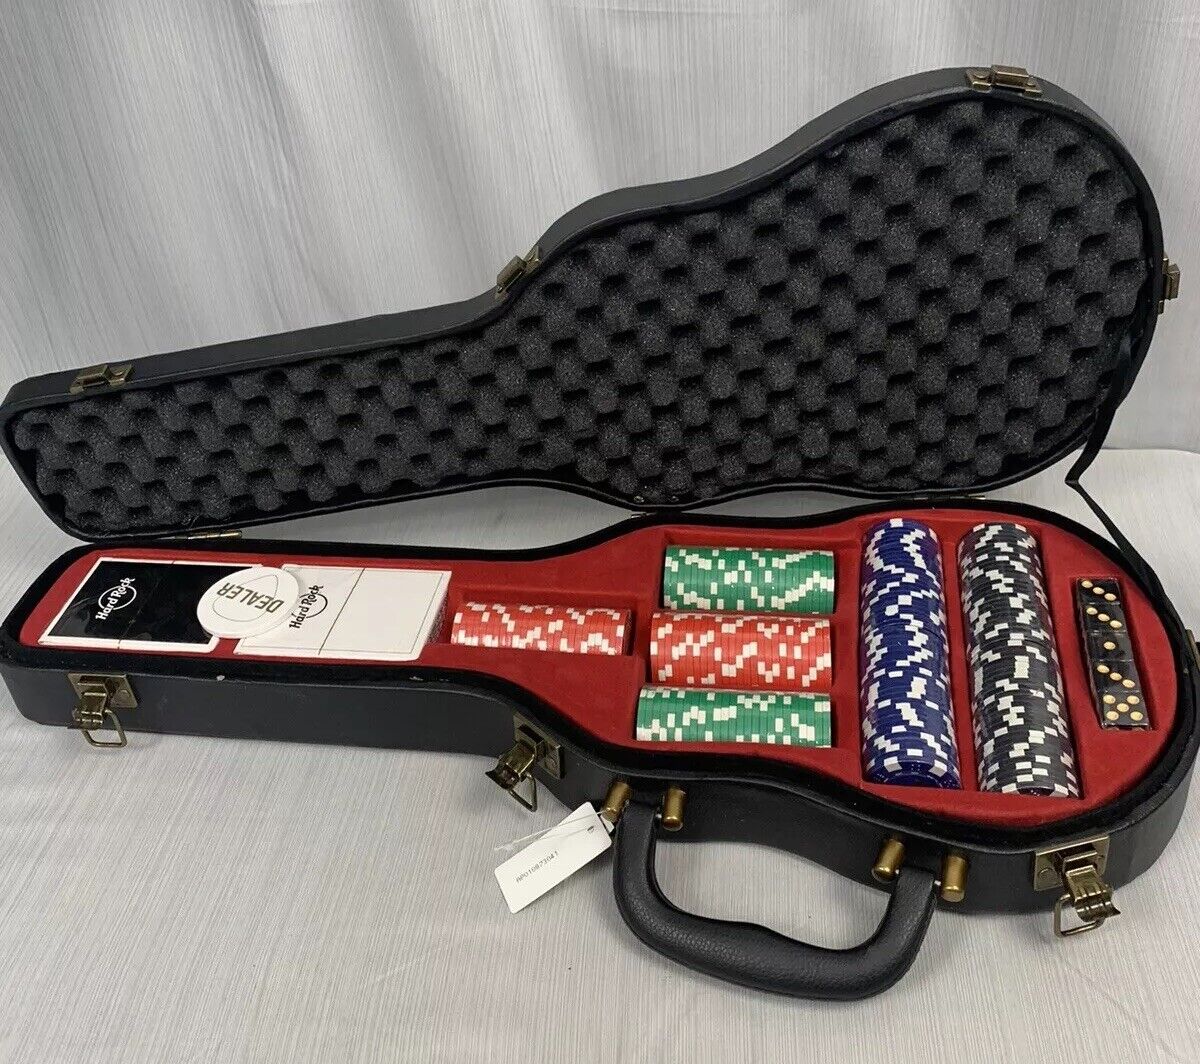 Hard Rock Cafe Poker Set in Guitar Case,  Limited Edition, Certified Authentic